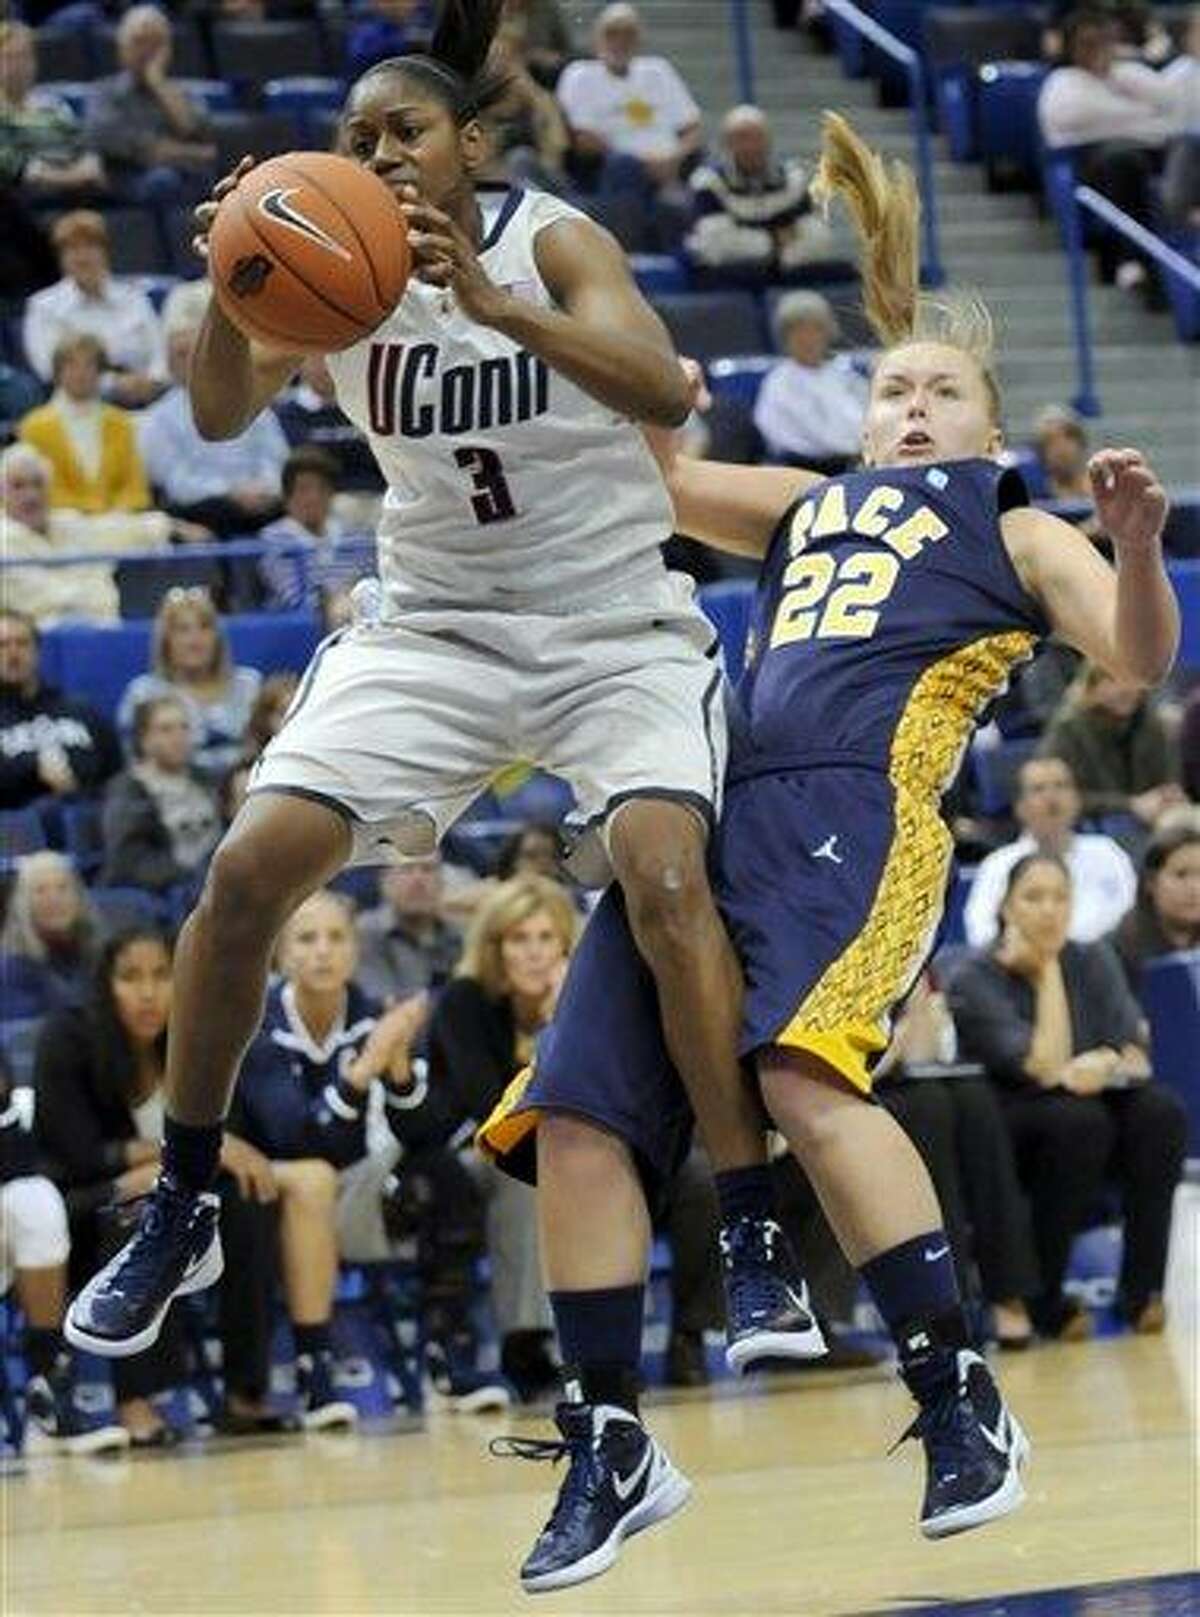 Connecticut's Tiffany Hayes pulls in a rebound past Pace's Margo Hackett in the second half of an exhibition NCAA college basketball game, Wednesday, Nov. 9, 2011, in Hartford, Conn. Connecticut defeated Pace 85-35. (AP Photo/Bob Child)